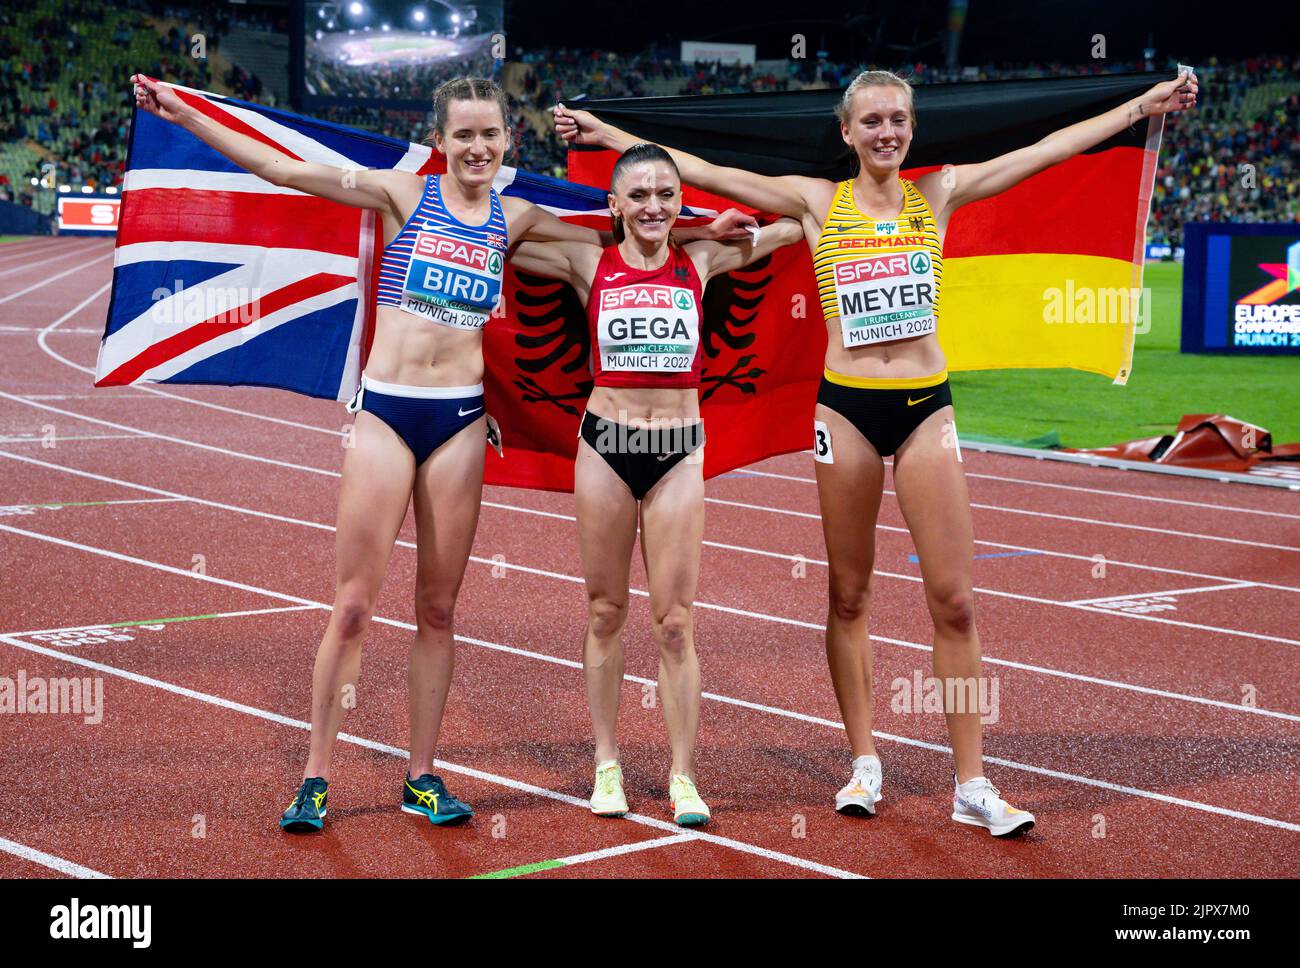 Munich, Germany. 20th Aug, 2022. European Championships, Athletics, 3000m steeplechase, women, final at Olympic Stadium, Elizabeth Bird (l-r) of Great Britain, Luiza Gega of Albania, Lea Meyer of Germany cheer at the finish line. Credit: Sven Hoppe/dpa/Alamy Live News Stock Photo